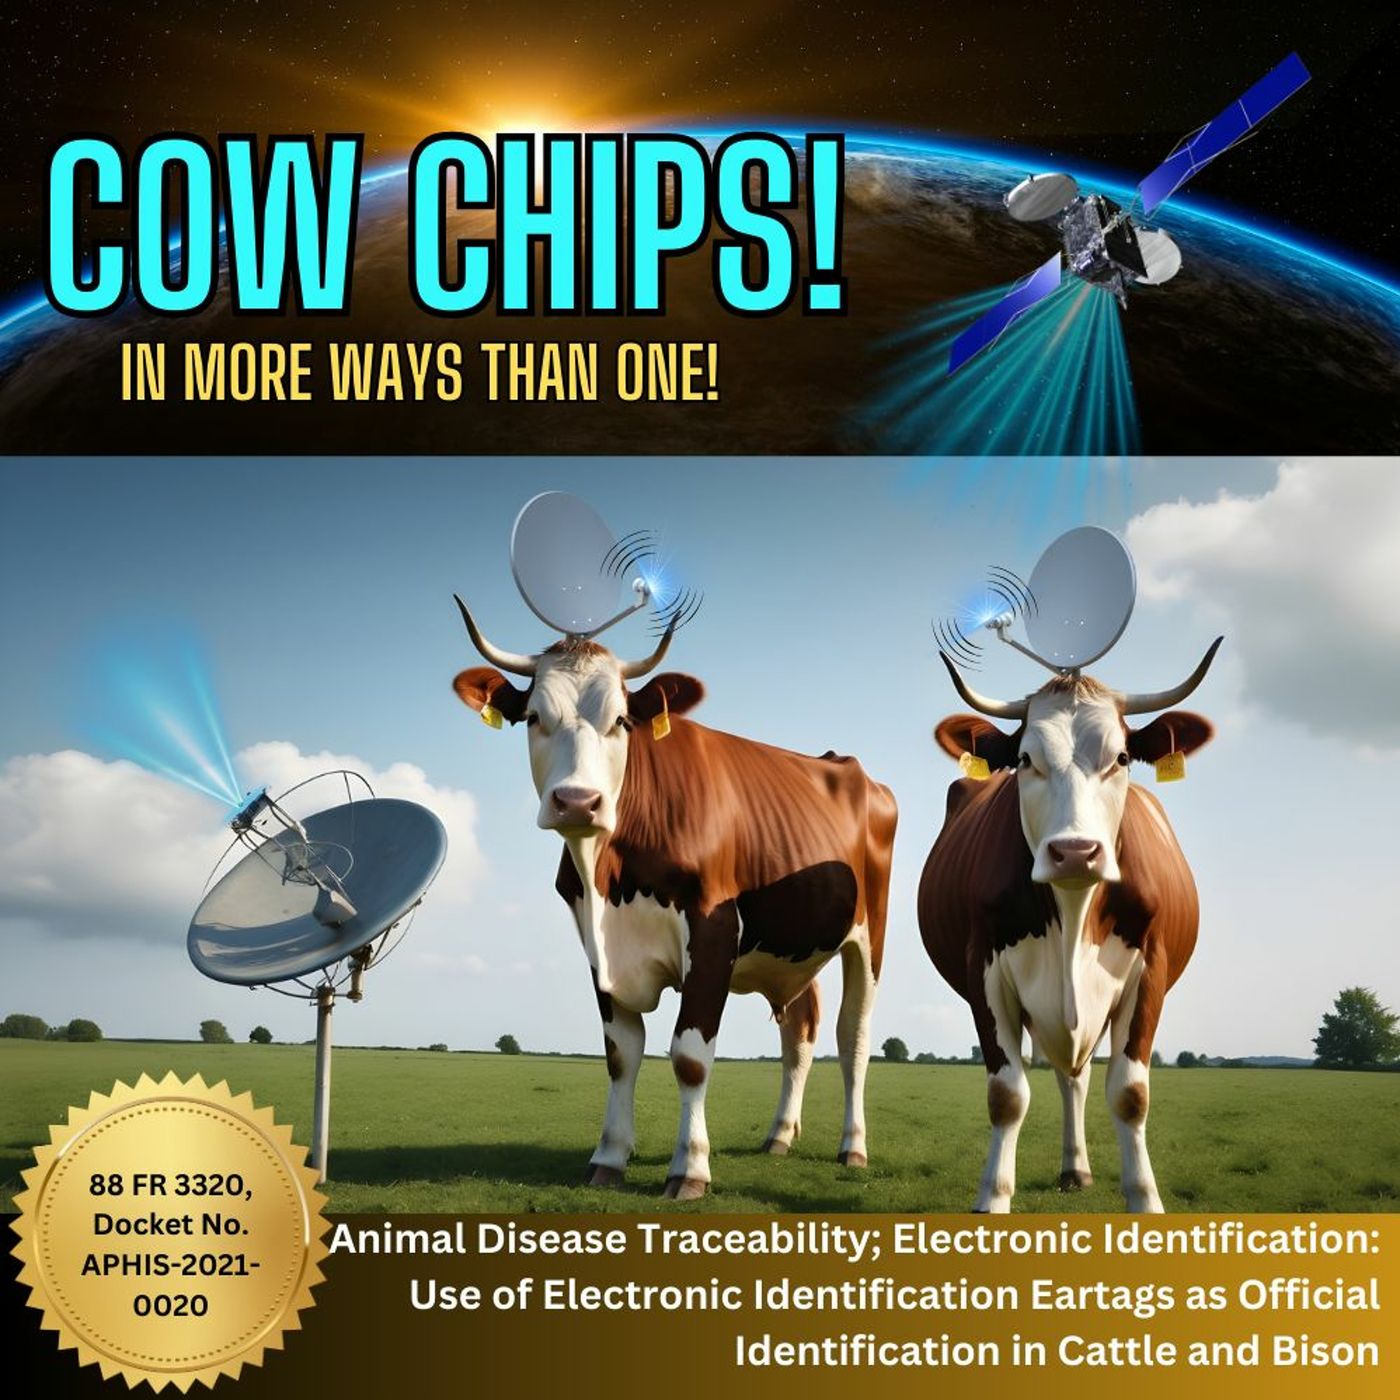 Cow Chips From Space - Literally! Tracking Live Animals